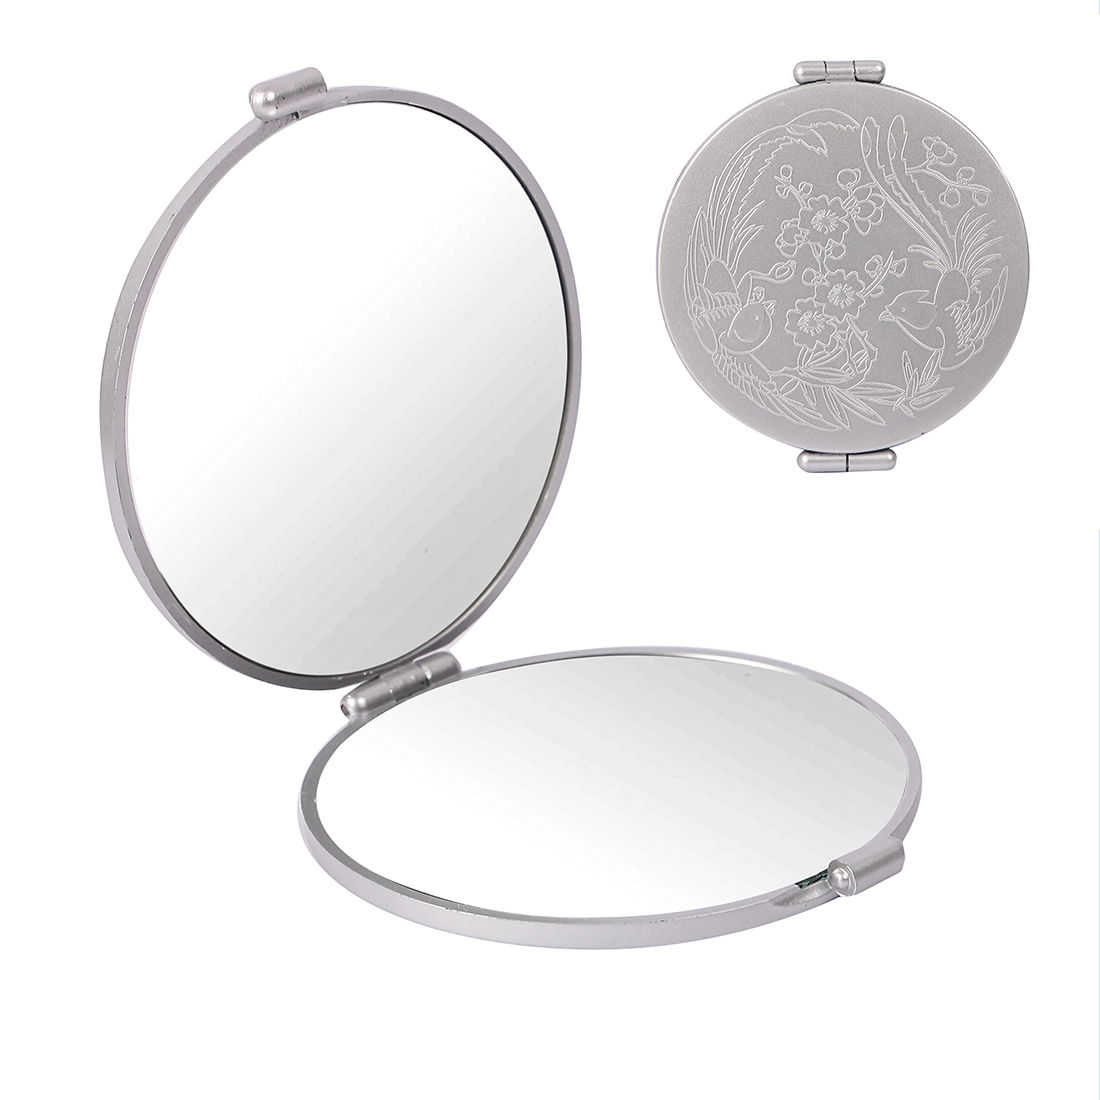 GUBB Travel Mirror Compact Cosmetic Bag Mirror for Women Magnifying Mirror for Makeup 5X - Silver